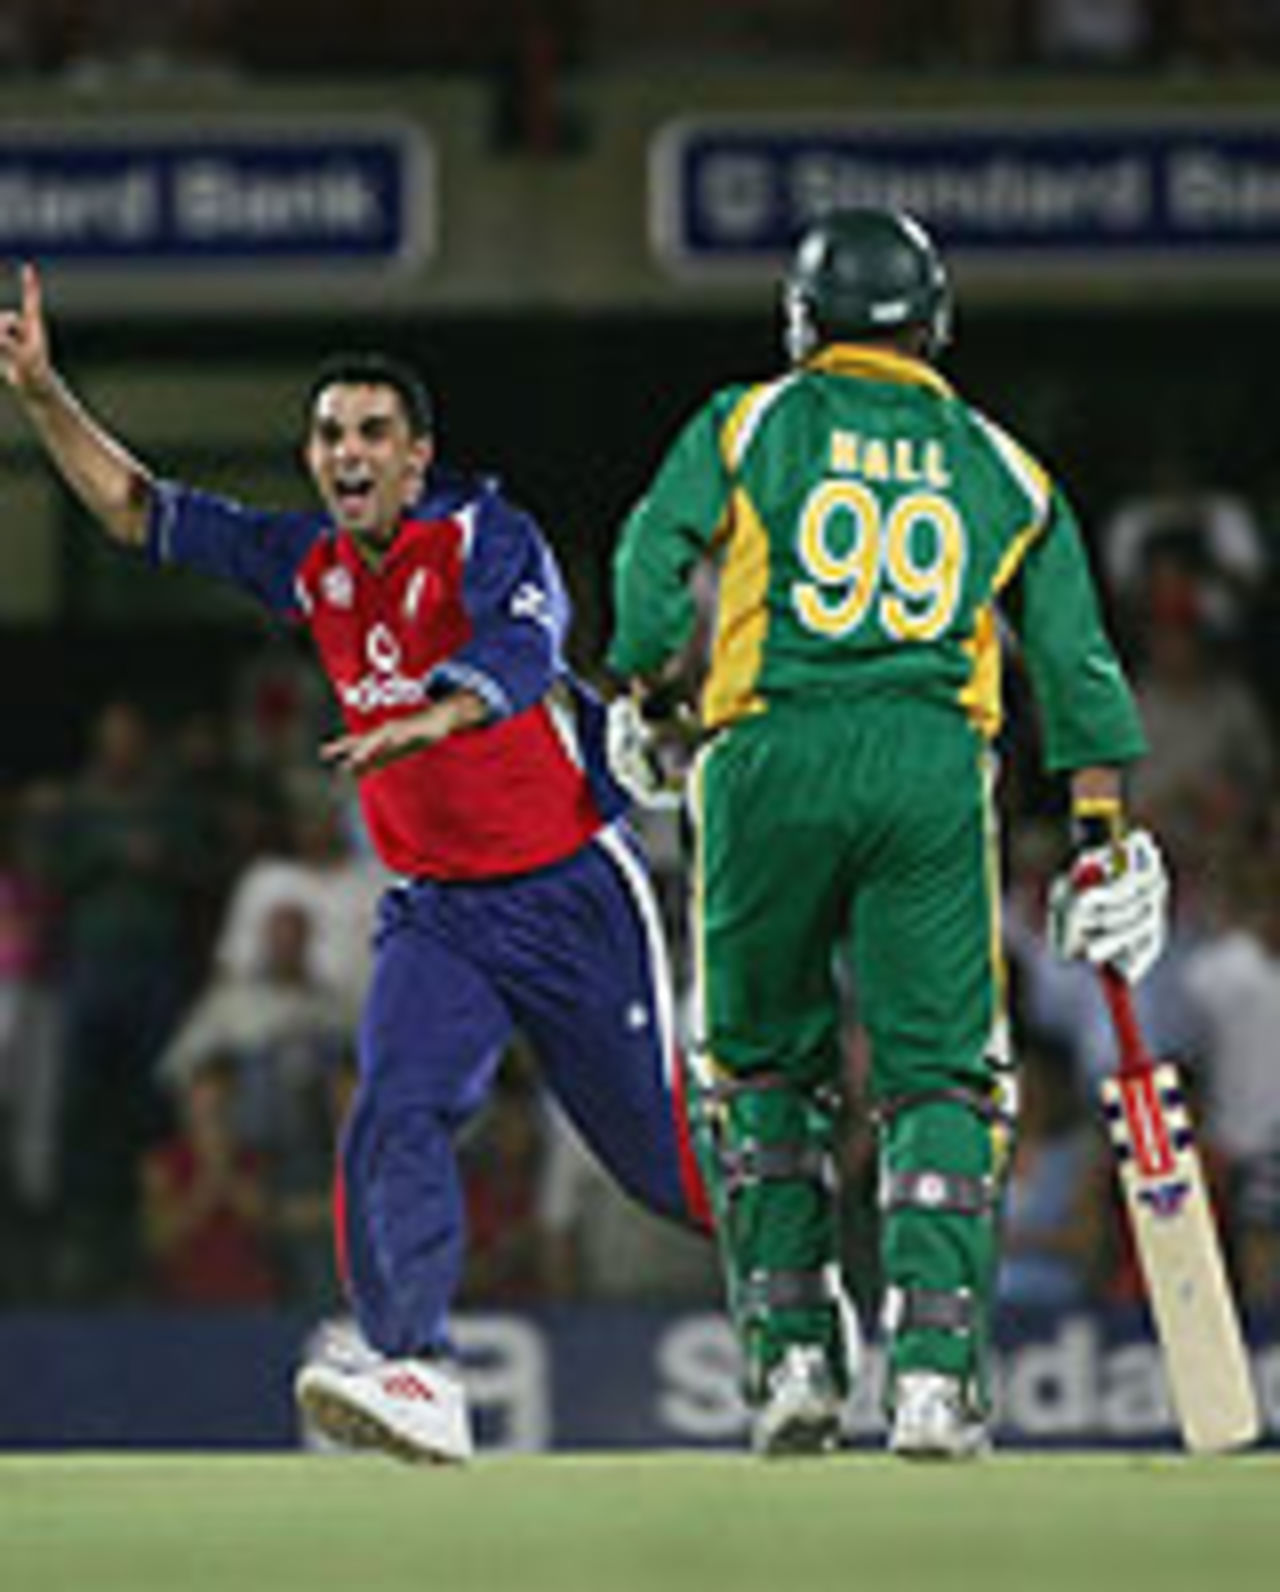 Kabir Ali secures a last-gasp tie, as Andrew Hall is stumped off the final ball of the match, England v South Africa, Bloemfontein, 2nd ODI, February 2, 2005